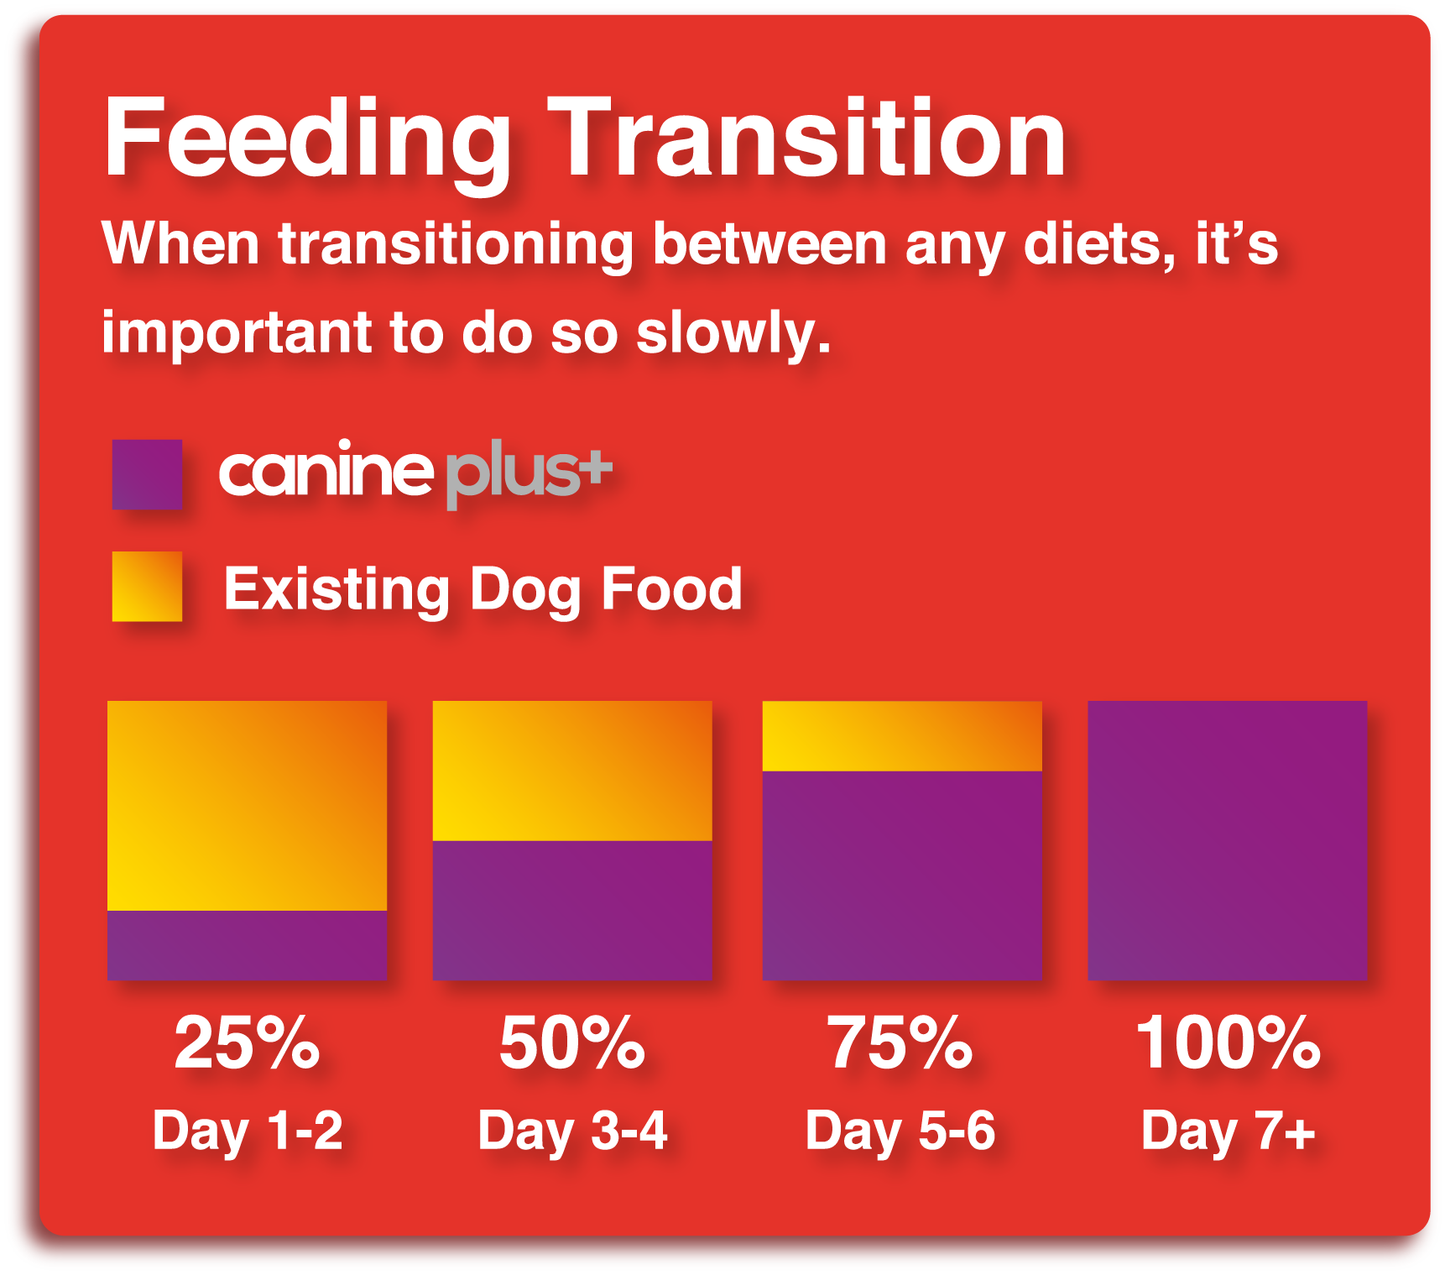 Feed Transition Guide for Canine Plus+